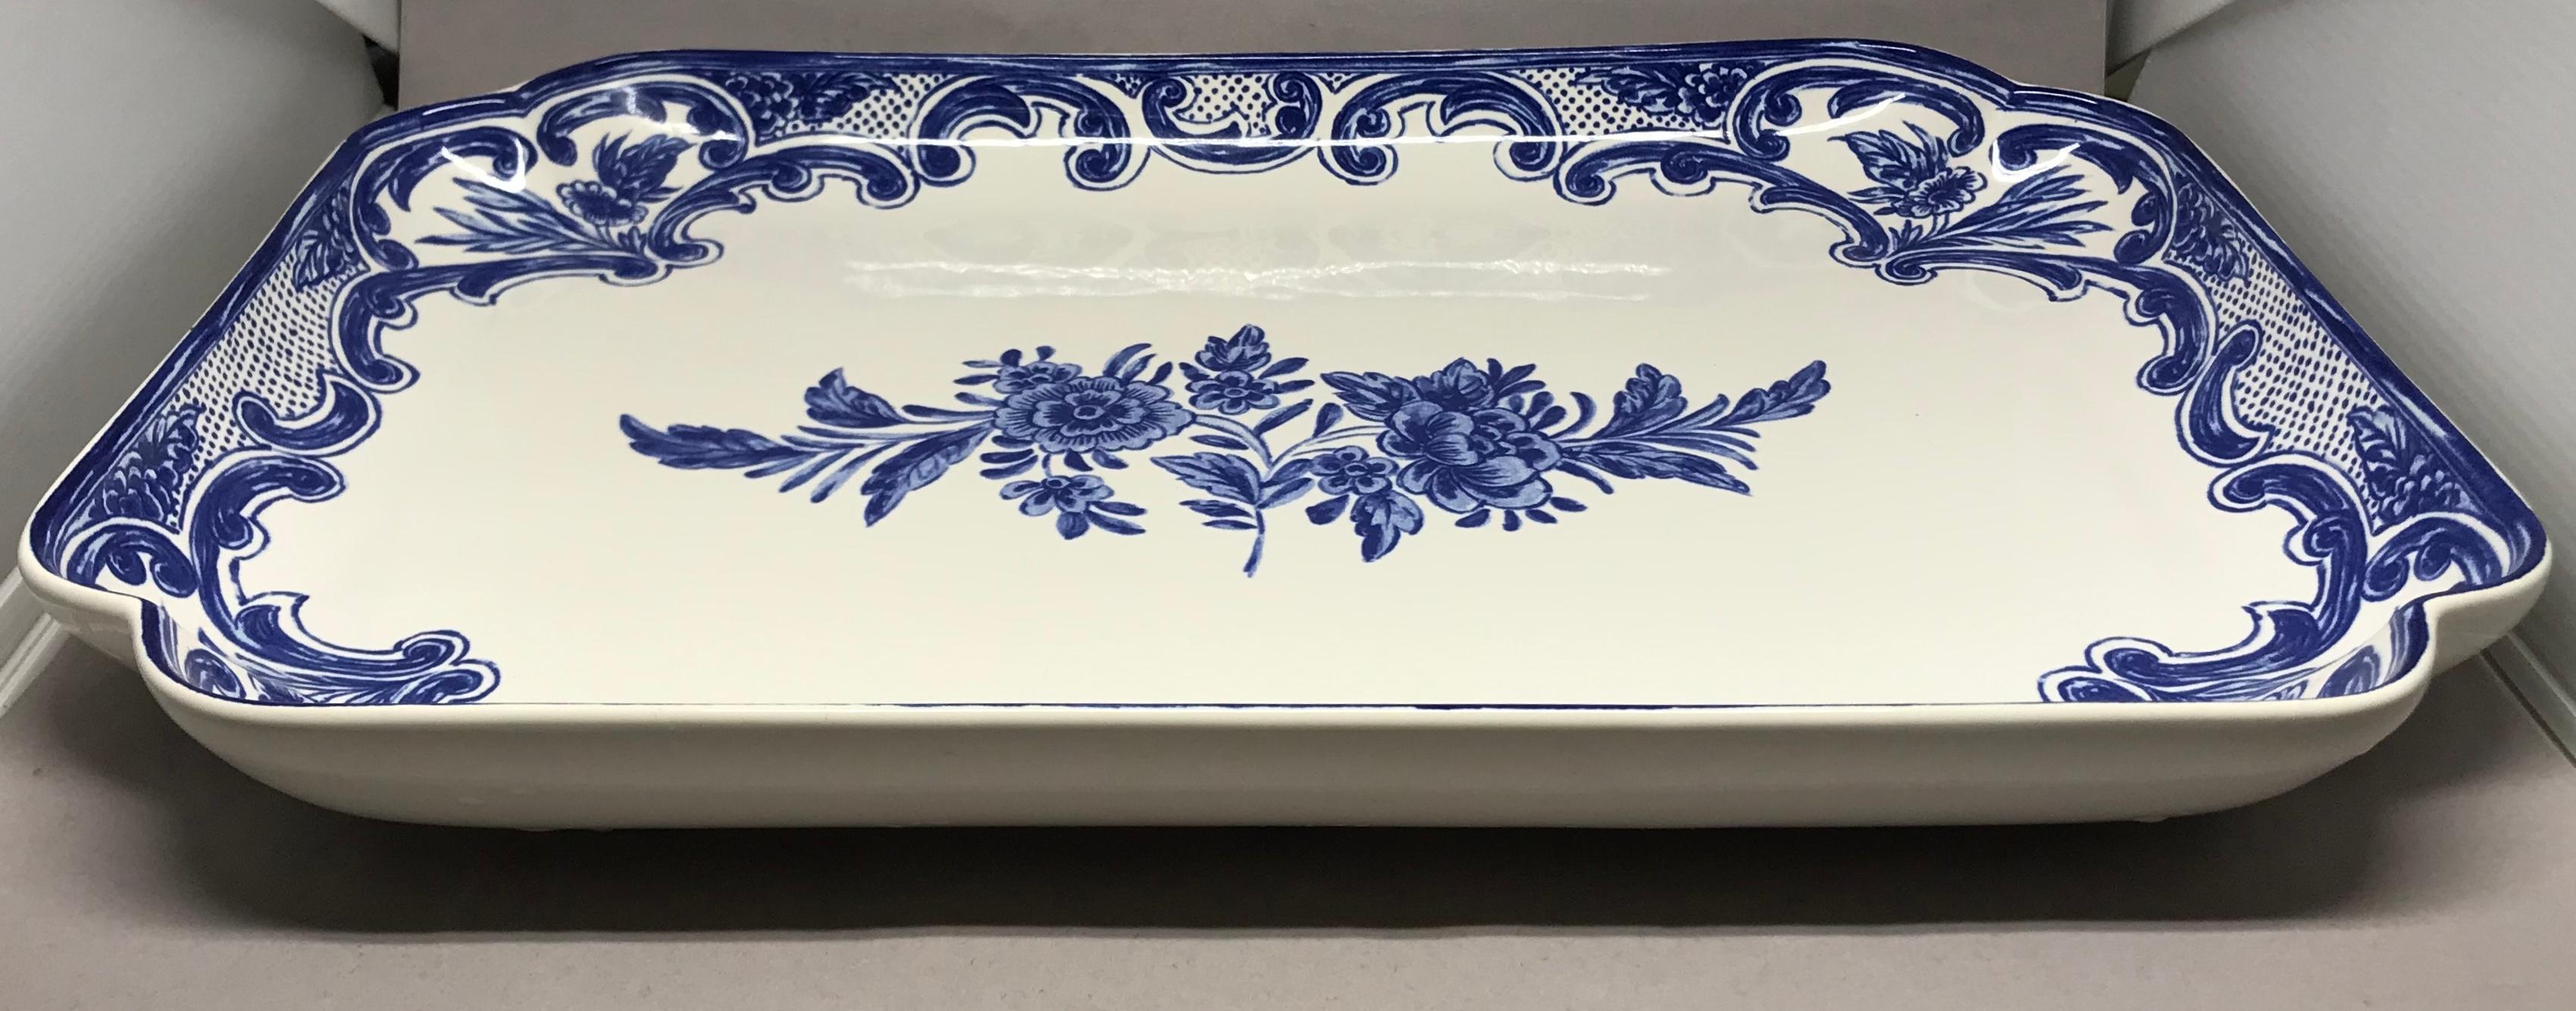 Painted Blue and White Delft Tiffany & Co. Platter